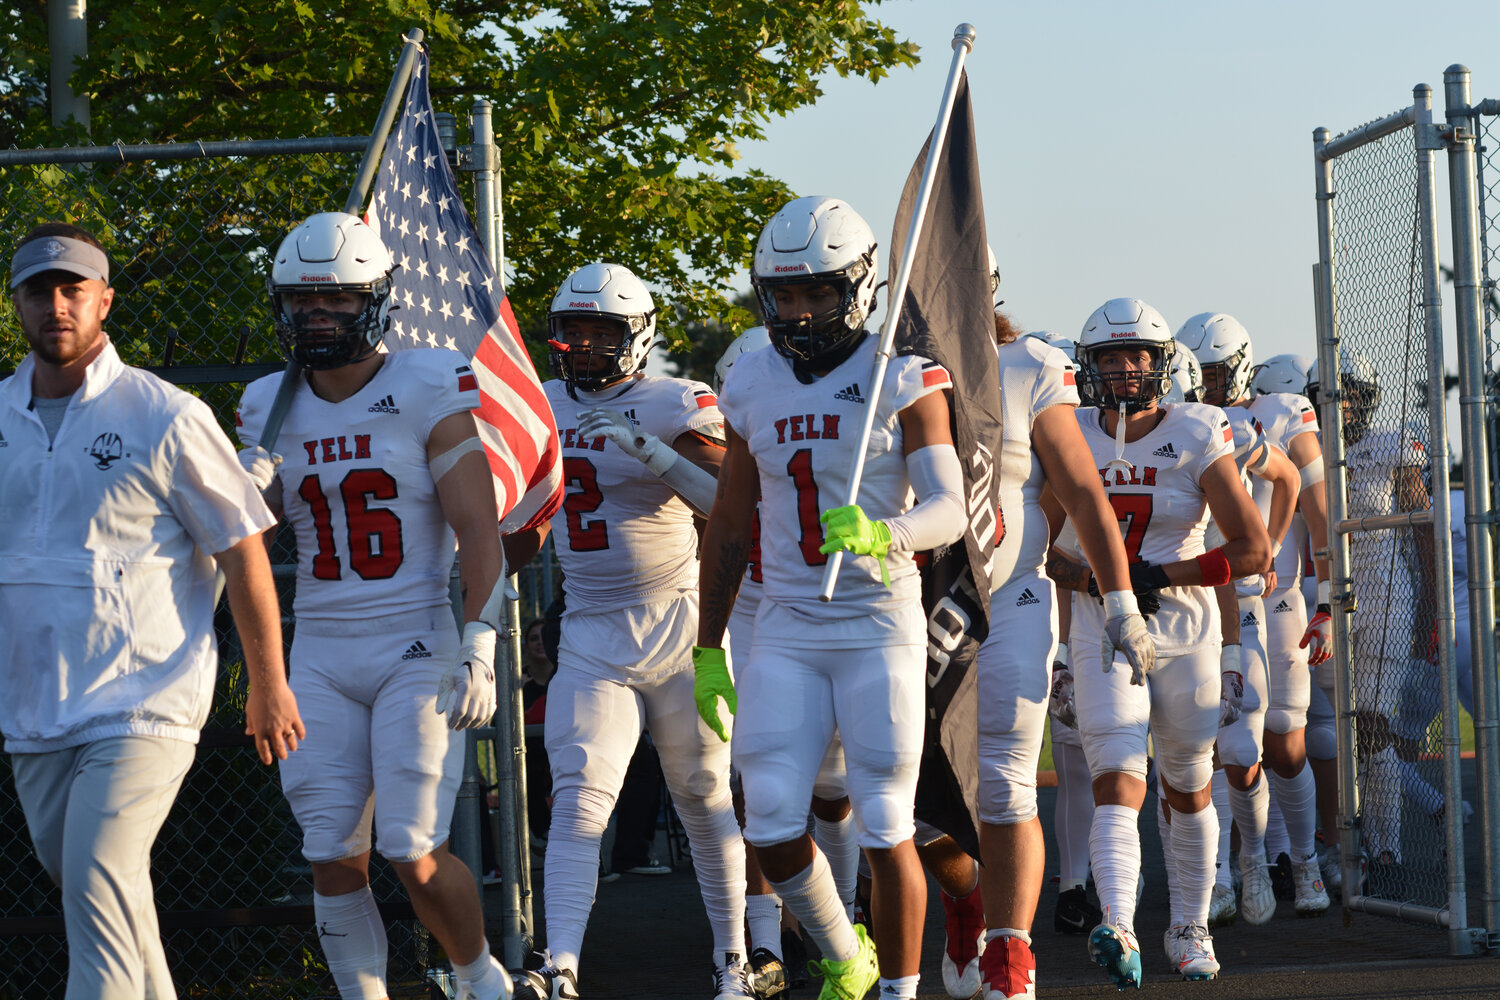 Led by coach William Benbrook, Nathan Ford (left) and Arlo Henderson Jr. (right) march the Tornados onto the field to face the Camas Papermakers on Sept. 1.